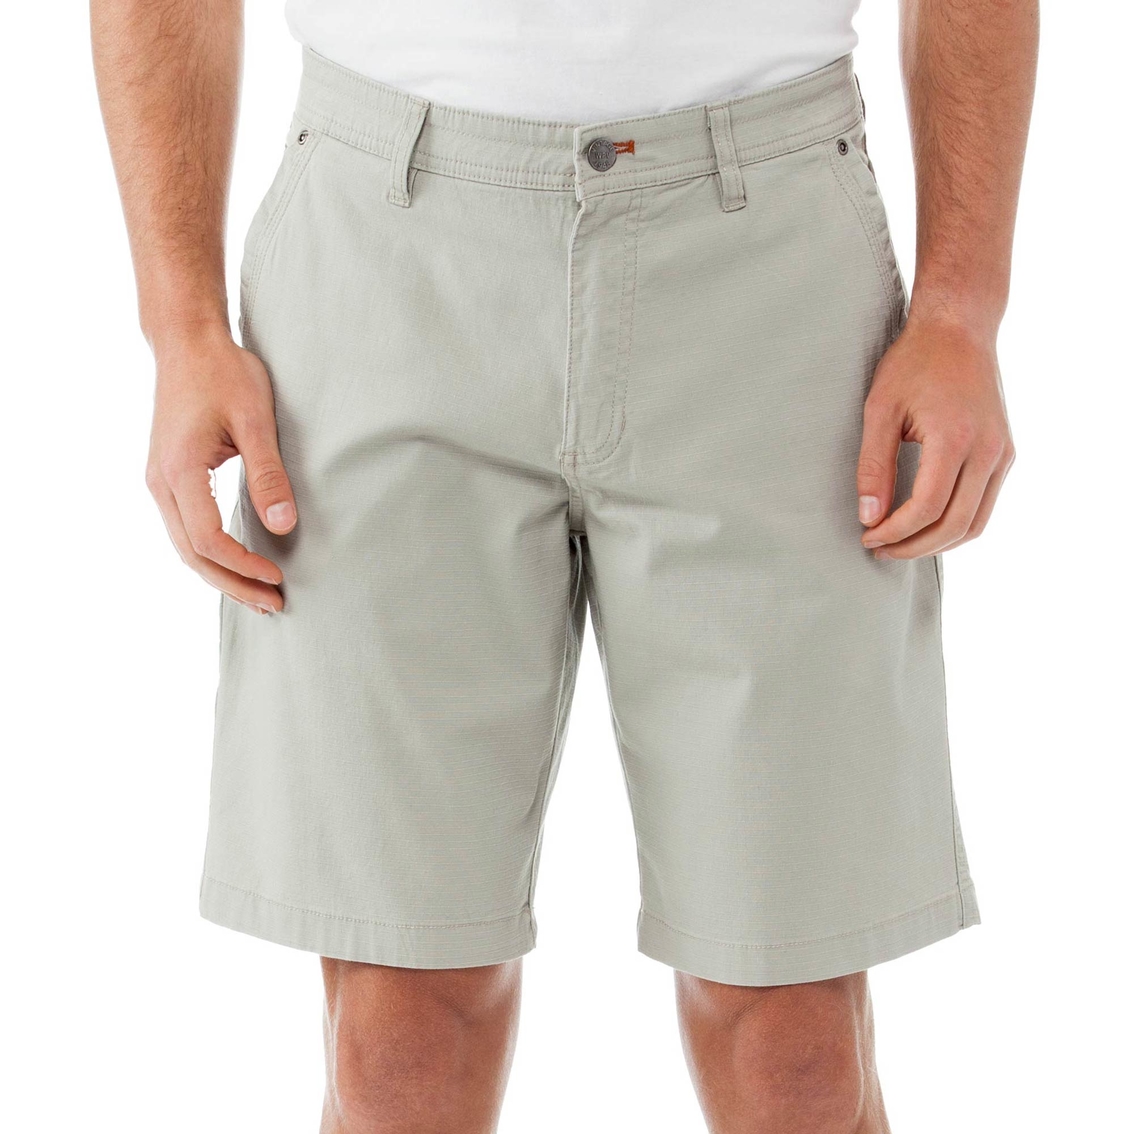 Weatherproof Utility Ripstop Shorts With Cell Phone Pocket | Shorts ...